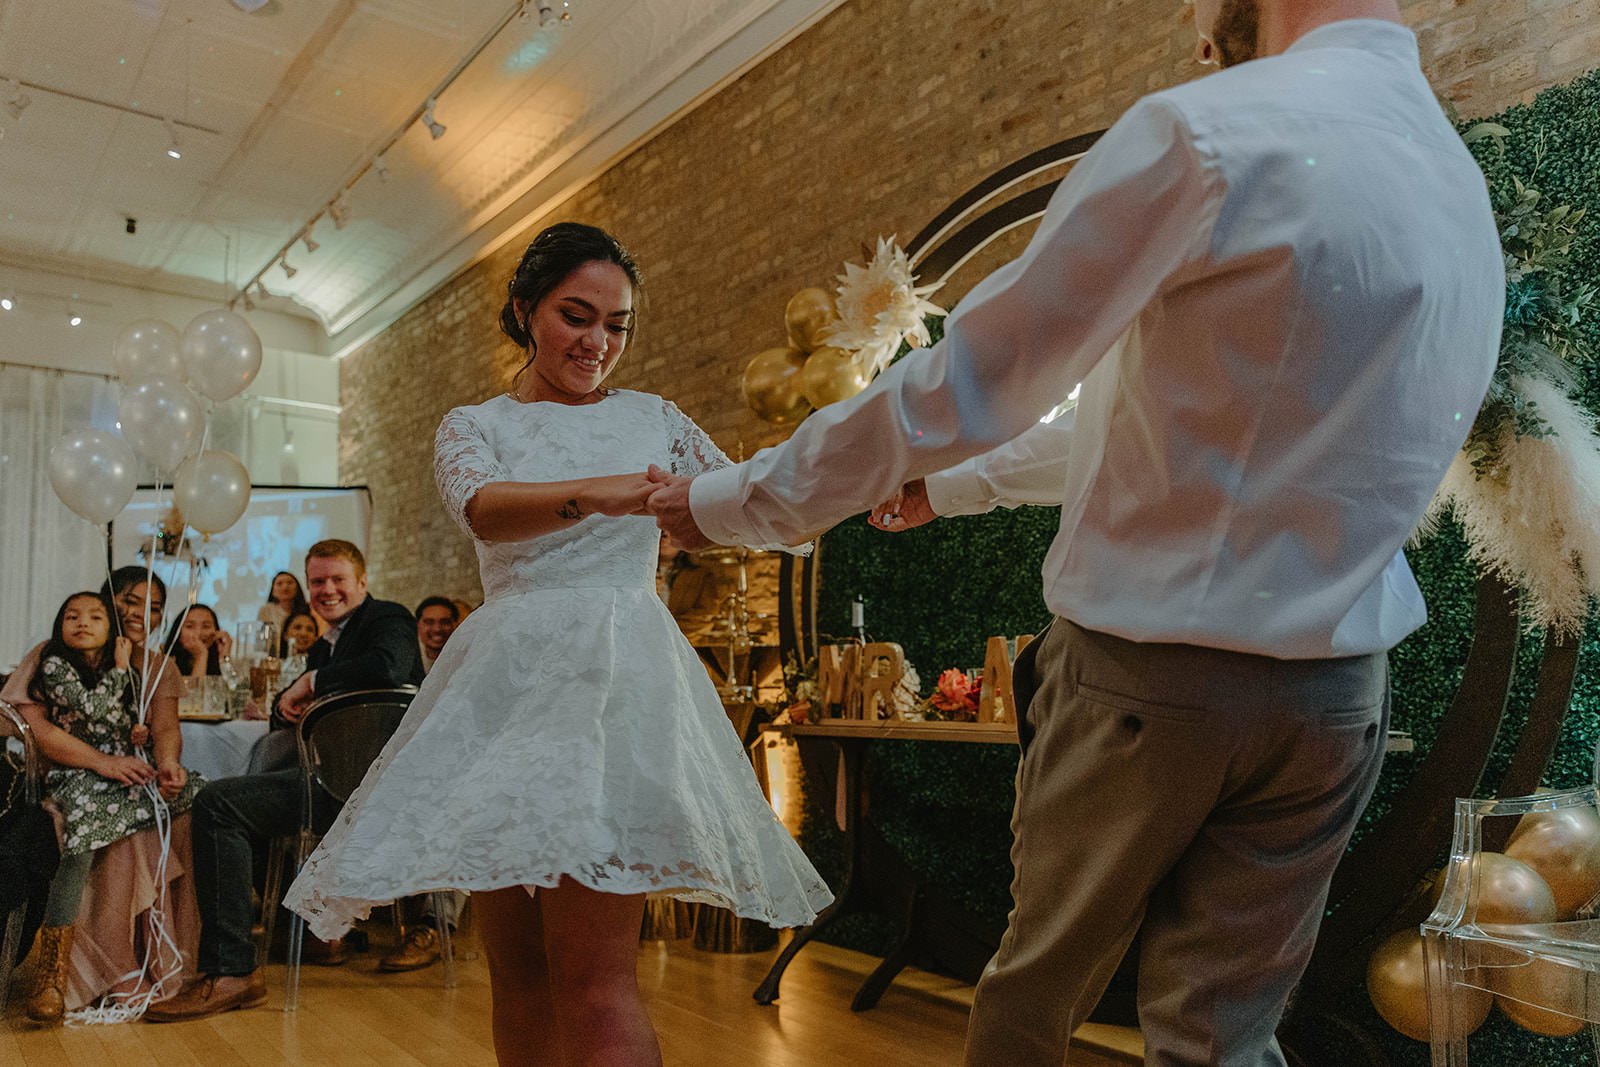 Newly wed couple shares their first dance in front of their friends and family